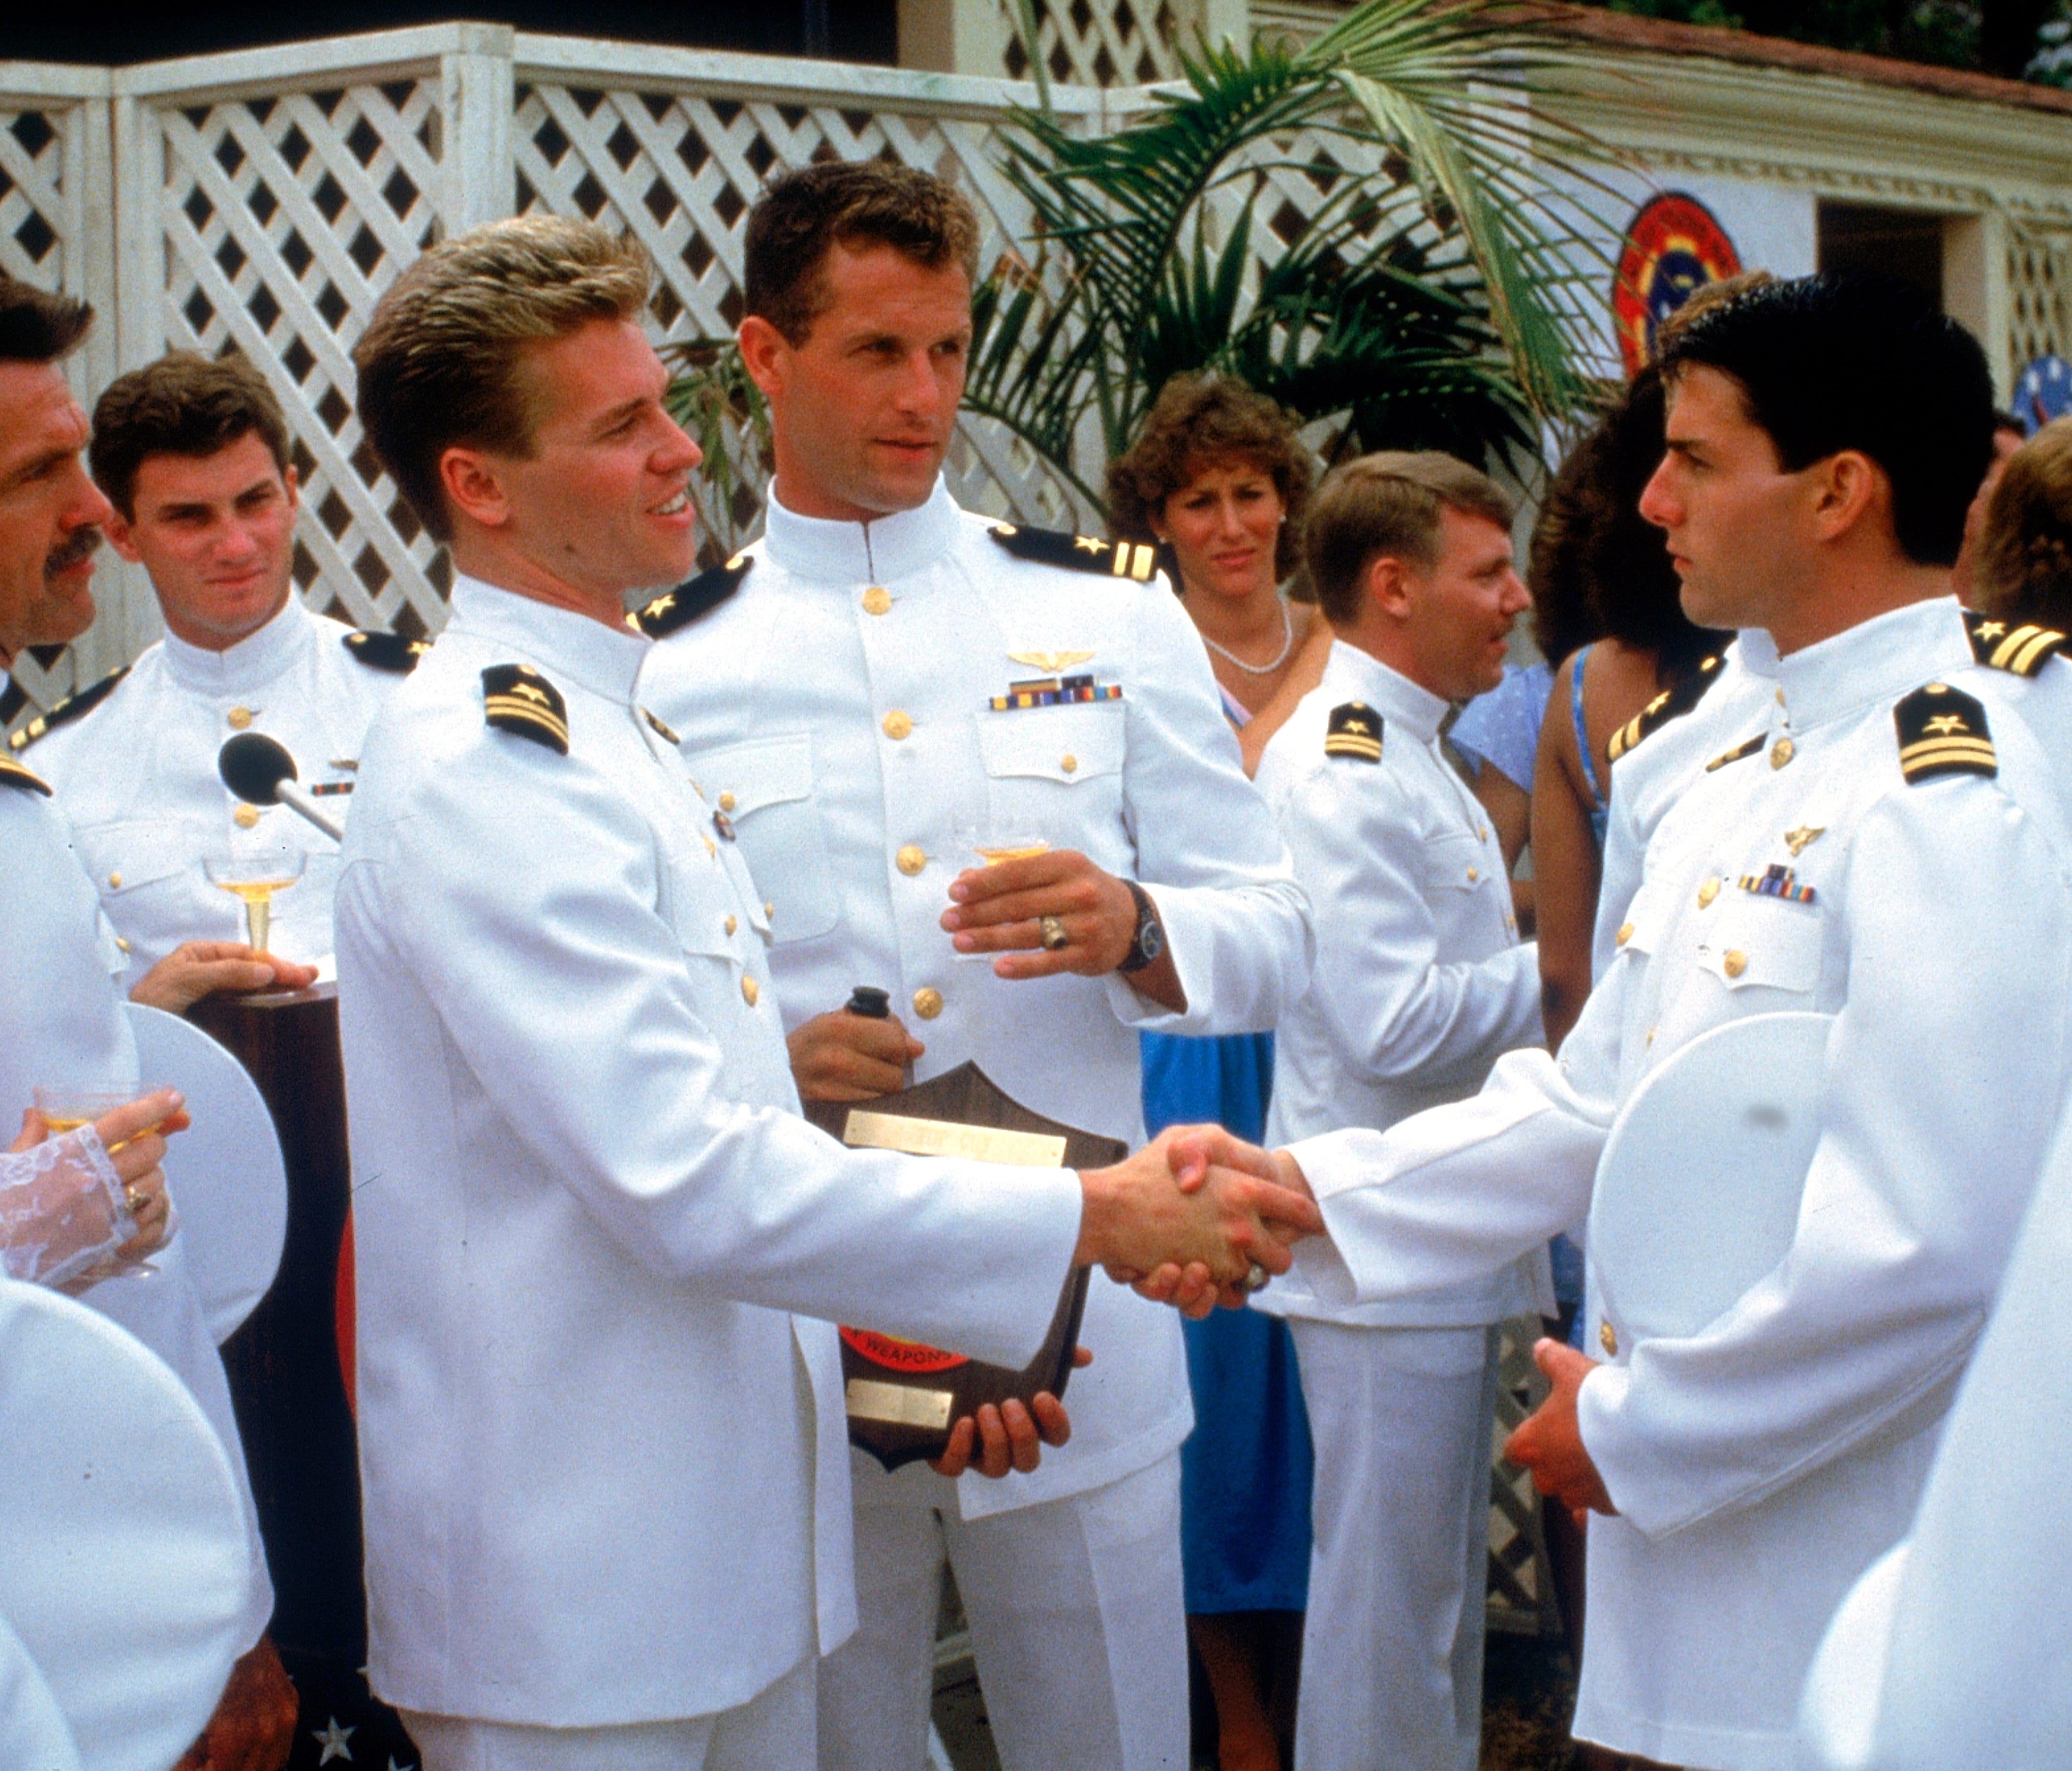 Val Kilmer, left, shakes hands with Tom Cruise in 'Top Gun.'